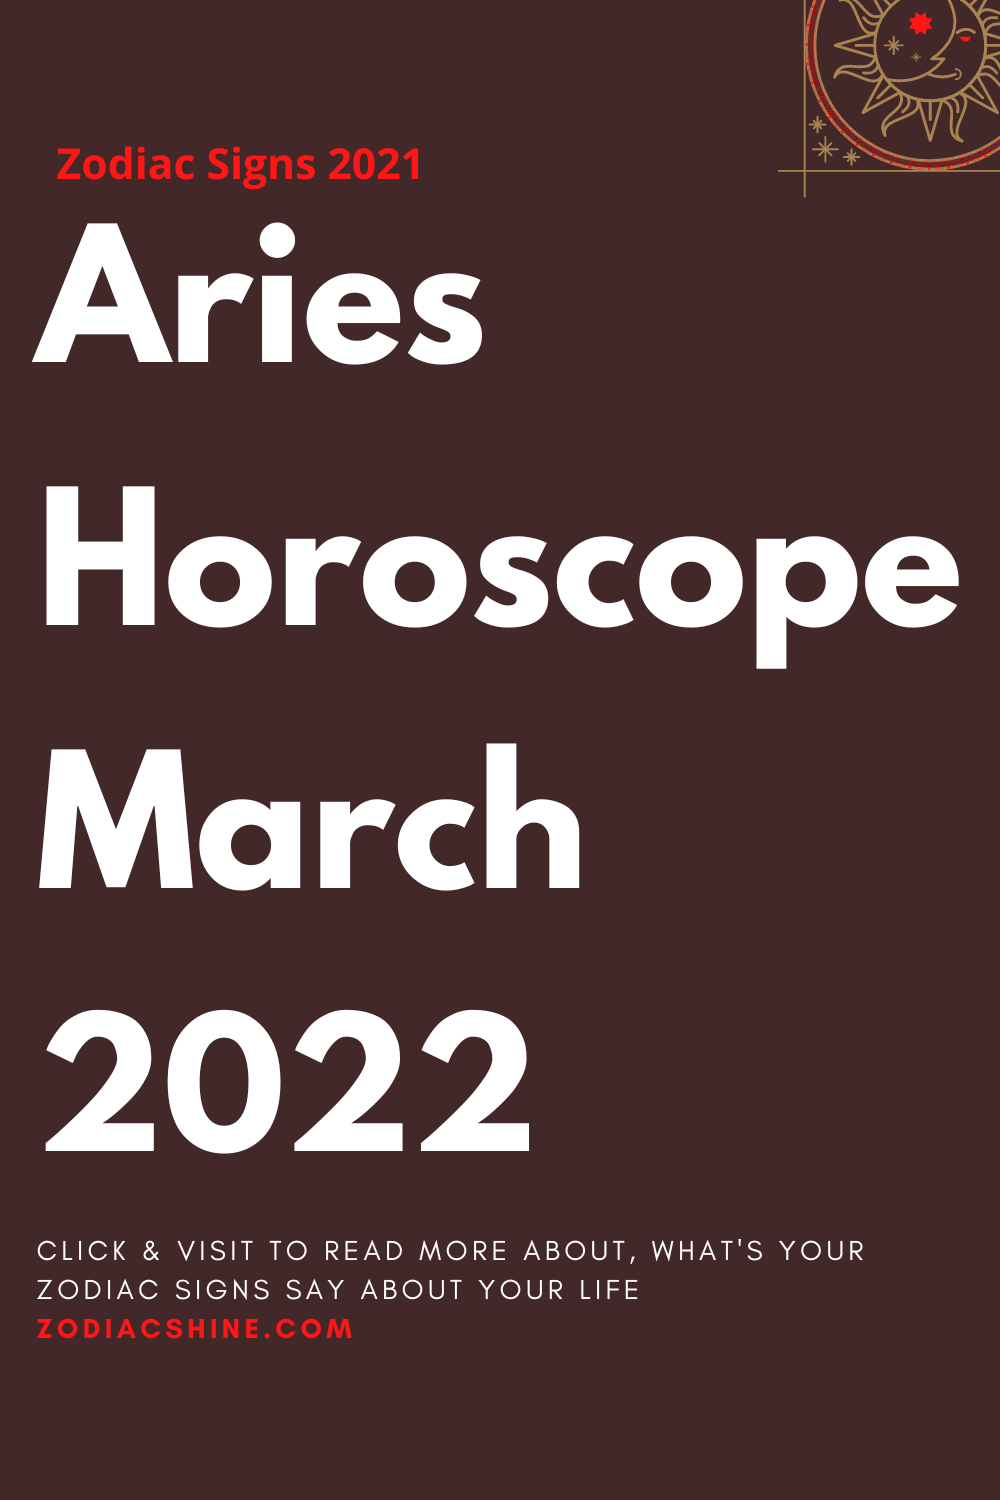 Aries Horoscope March 2022